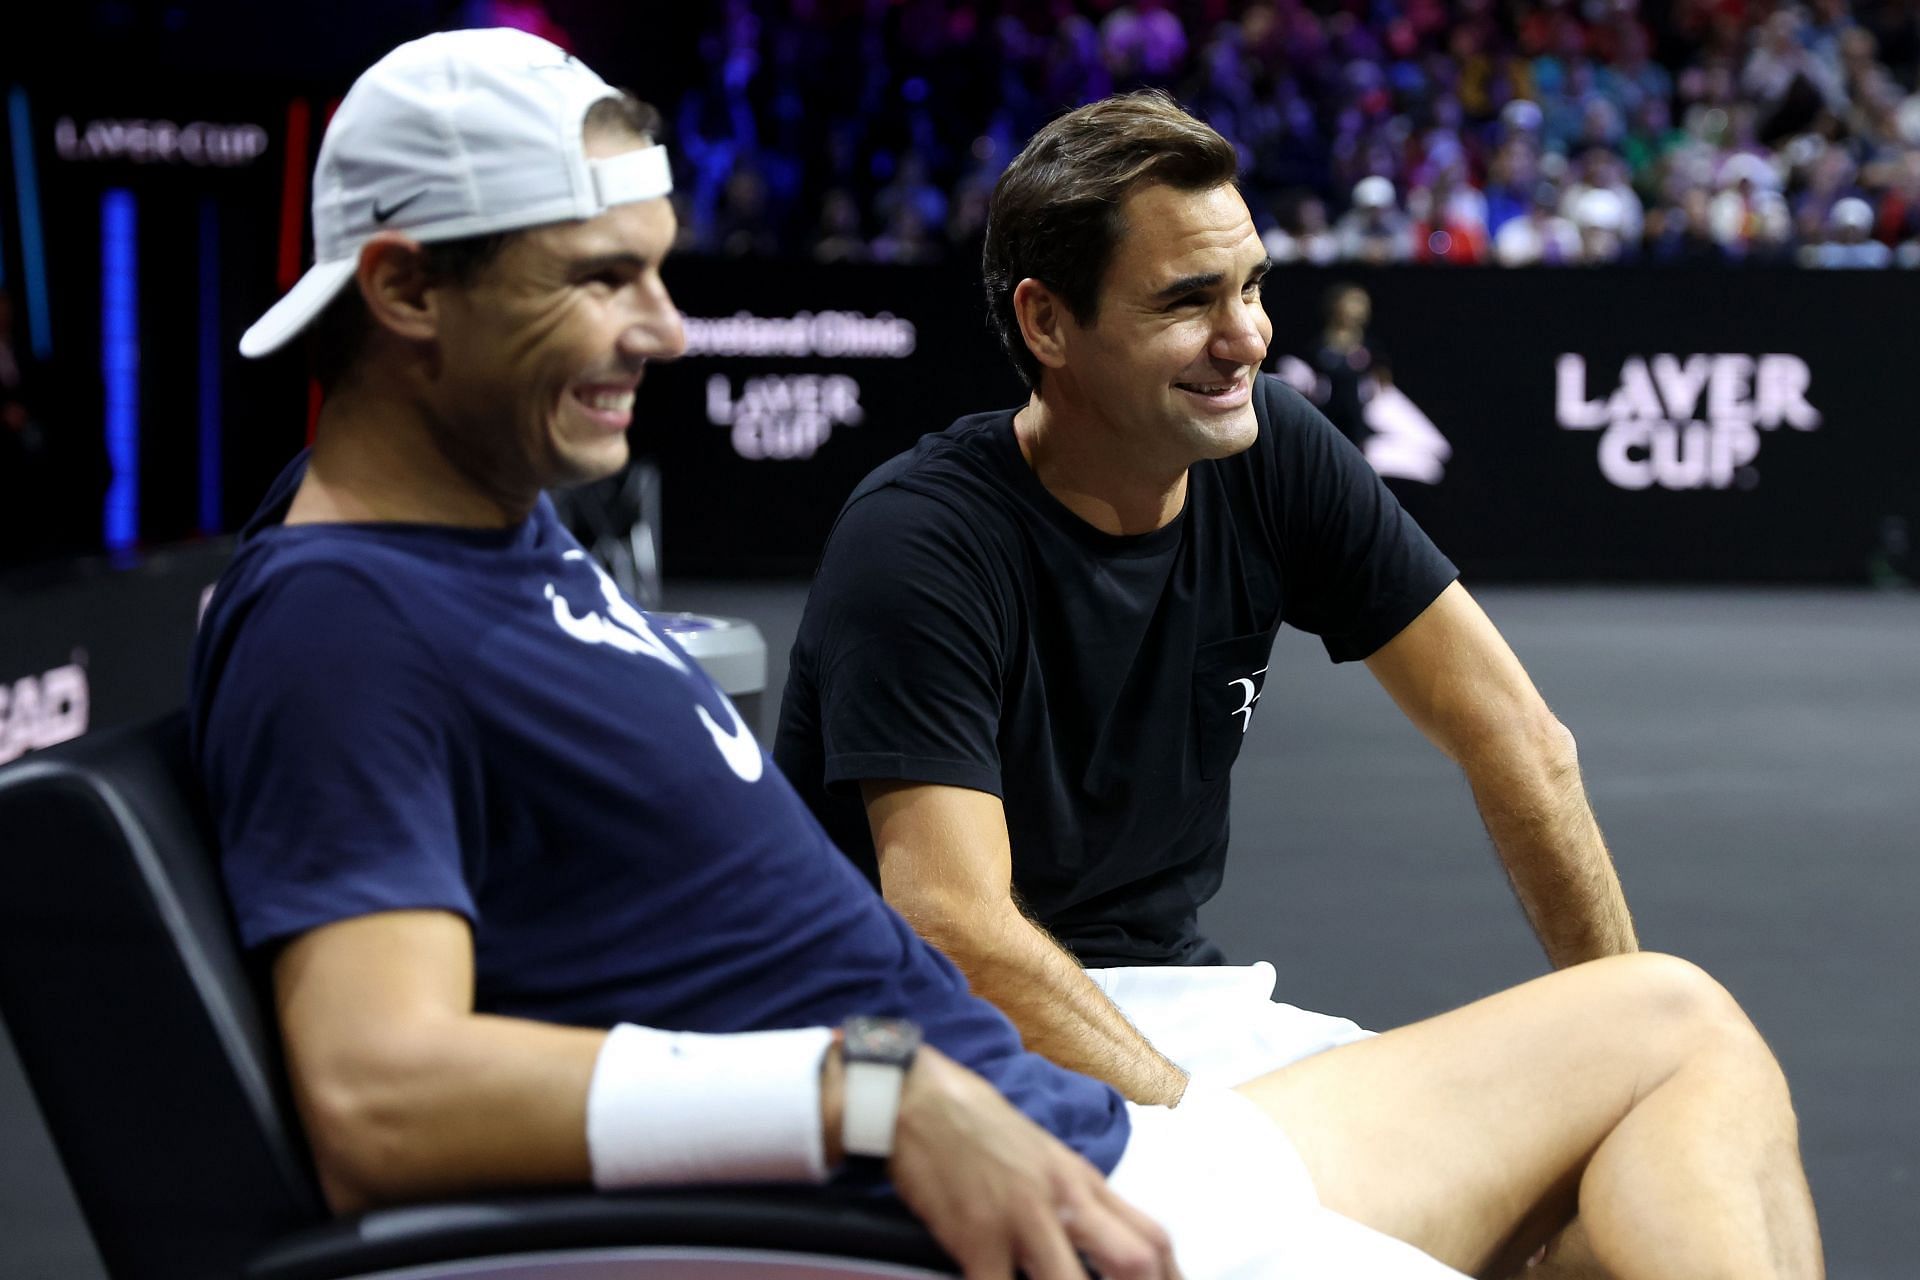 Rafael Nadal [left] with Roger Federer during a practice session ahead of the 2022 Laver Cup.